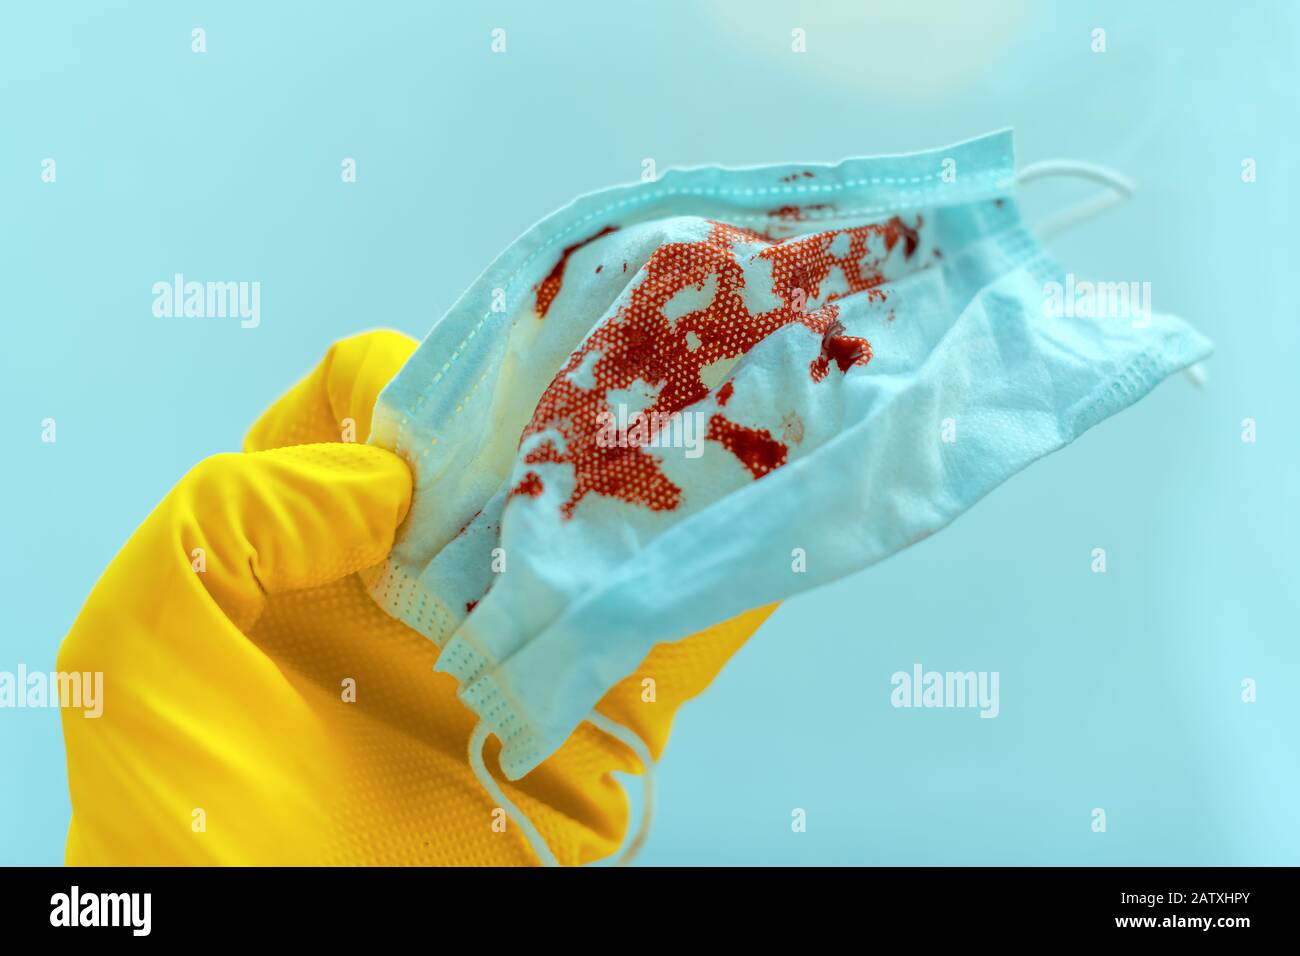 Medical worker disposing bloody protective face respirator mask in quarantine, selective focus Stock Photo